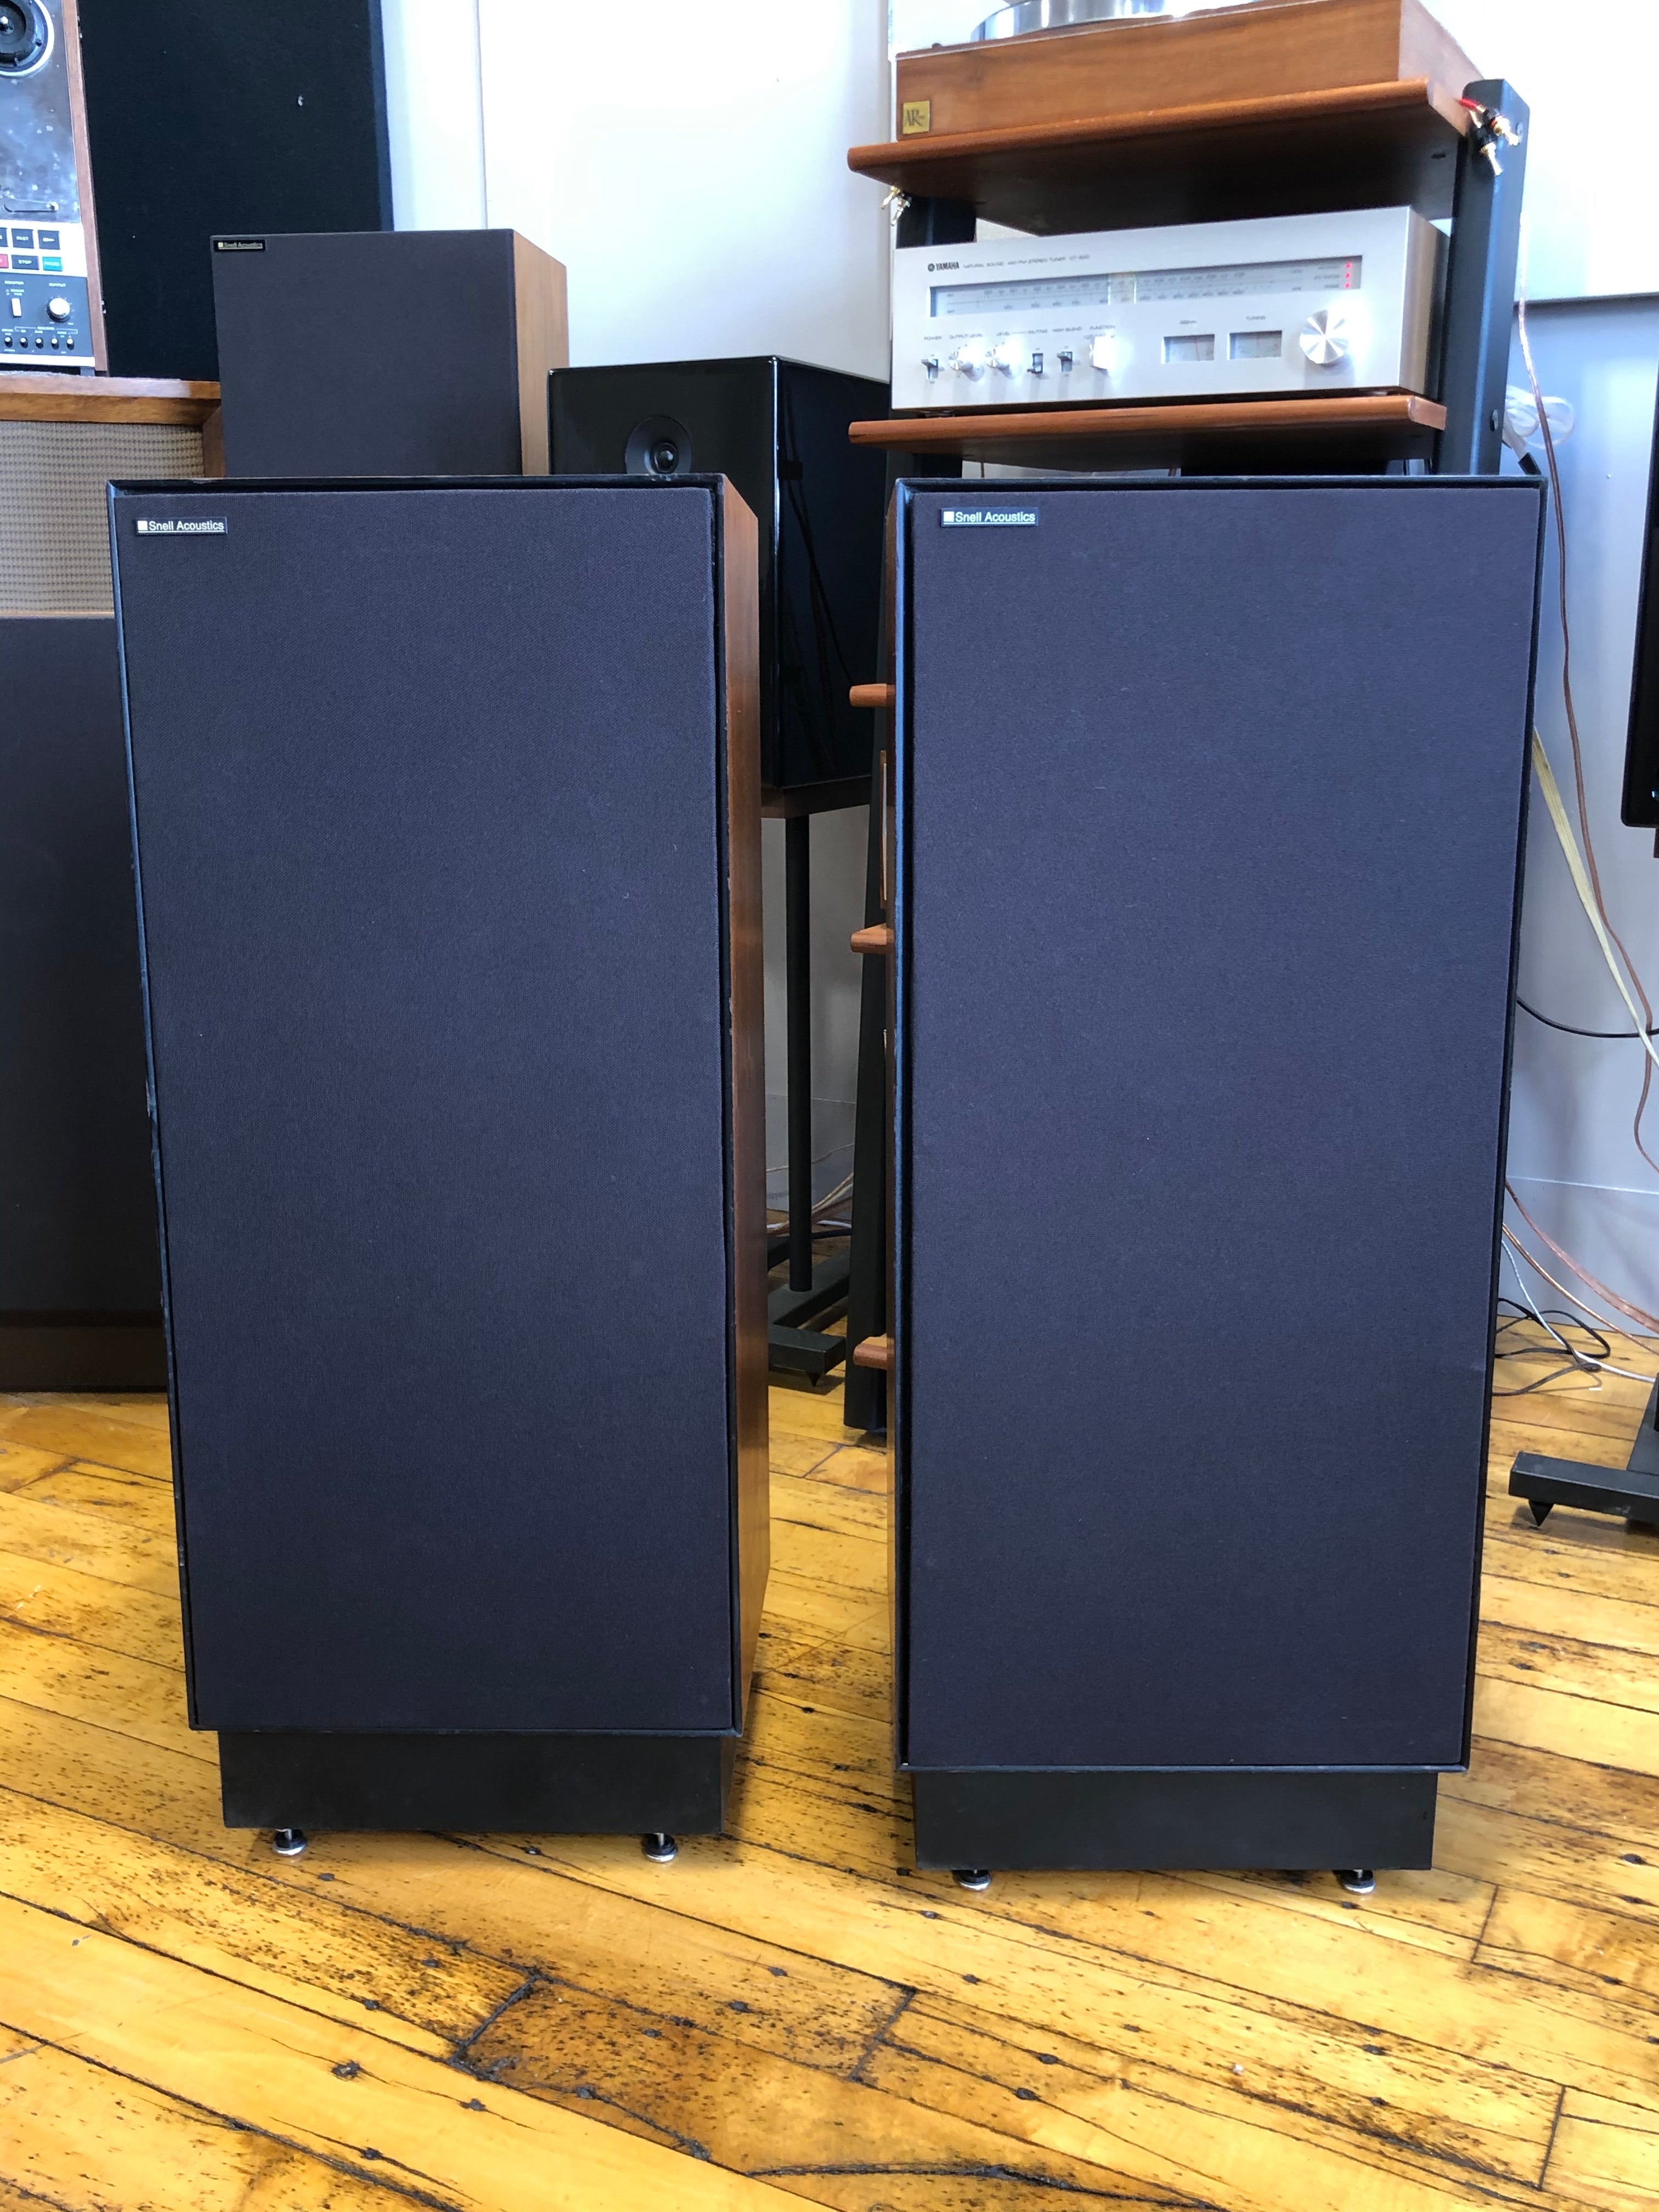 Snell Acoustics Type E-II Vintage Tower Loudspeakers - SOLD